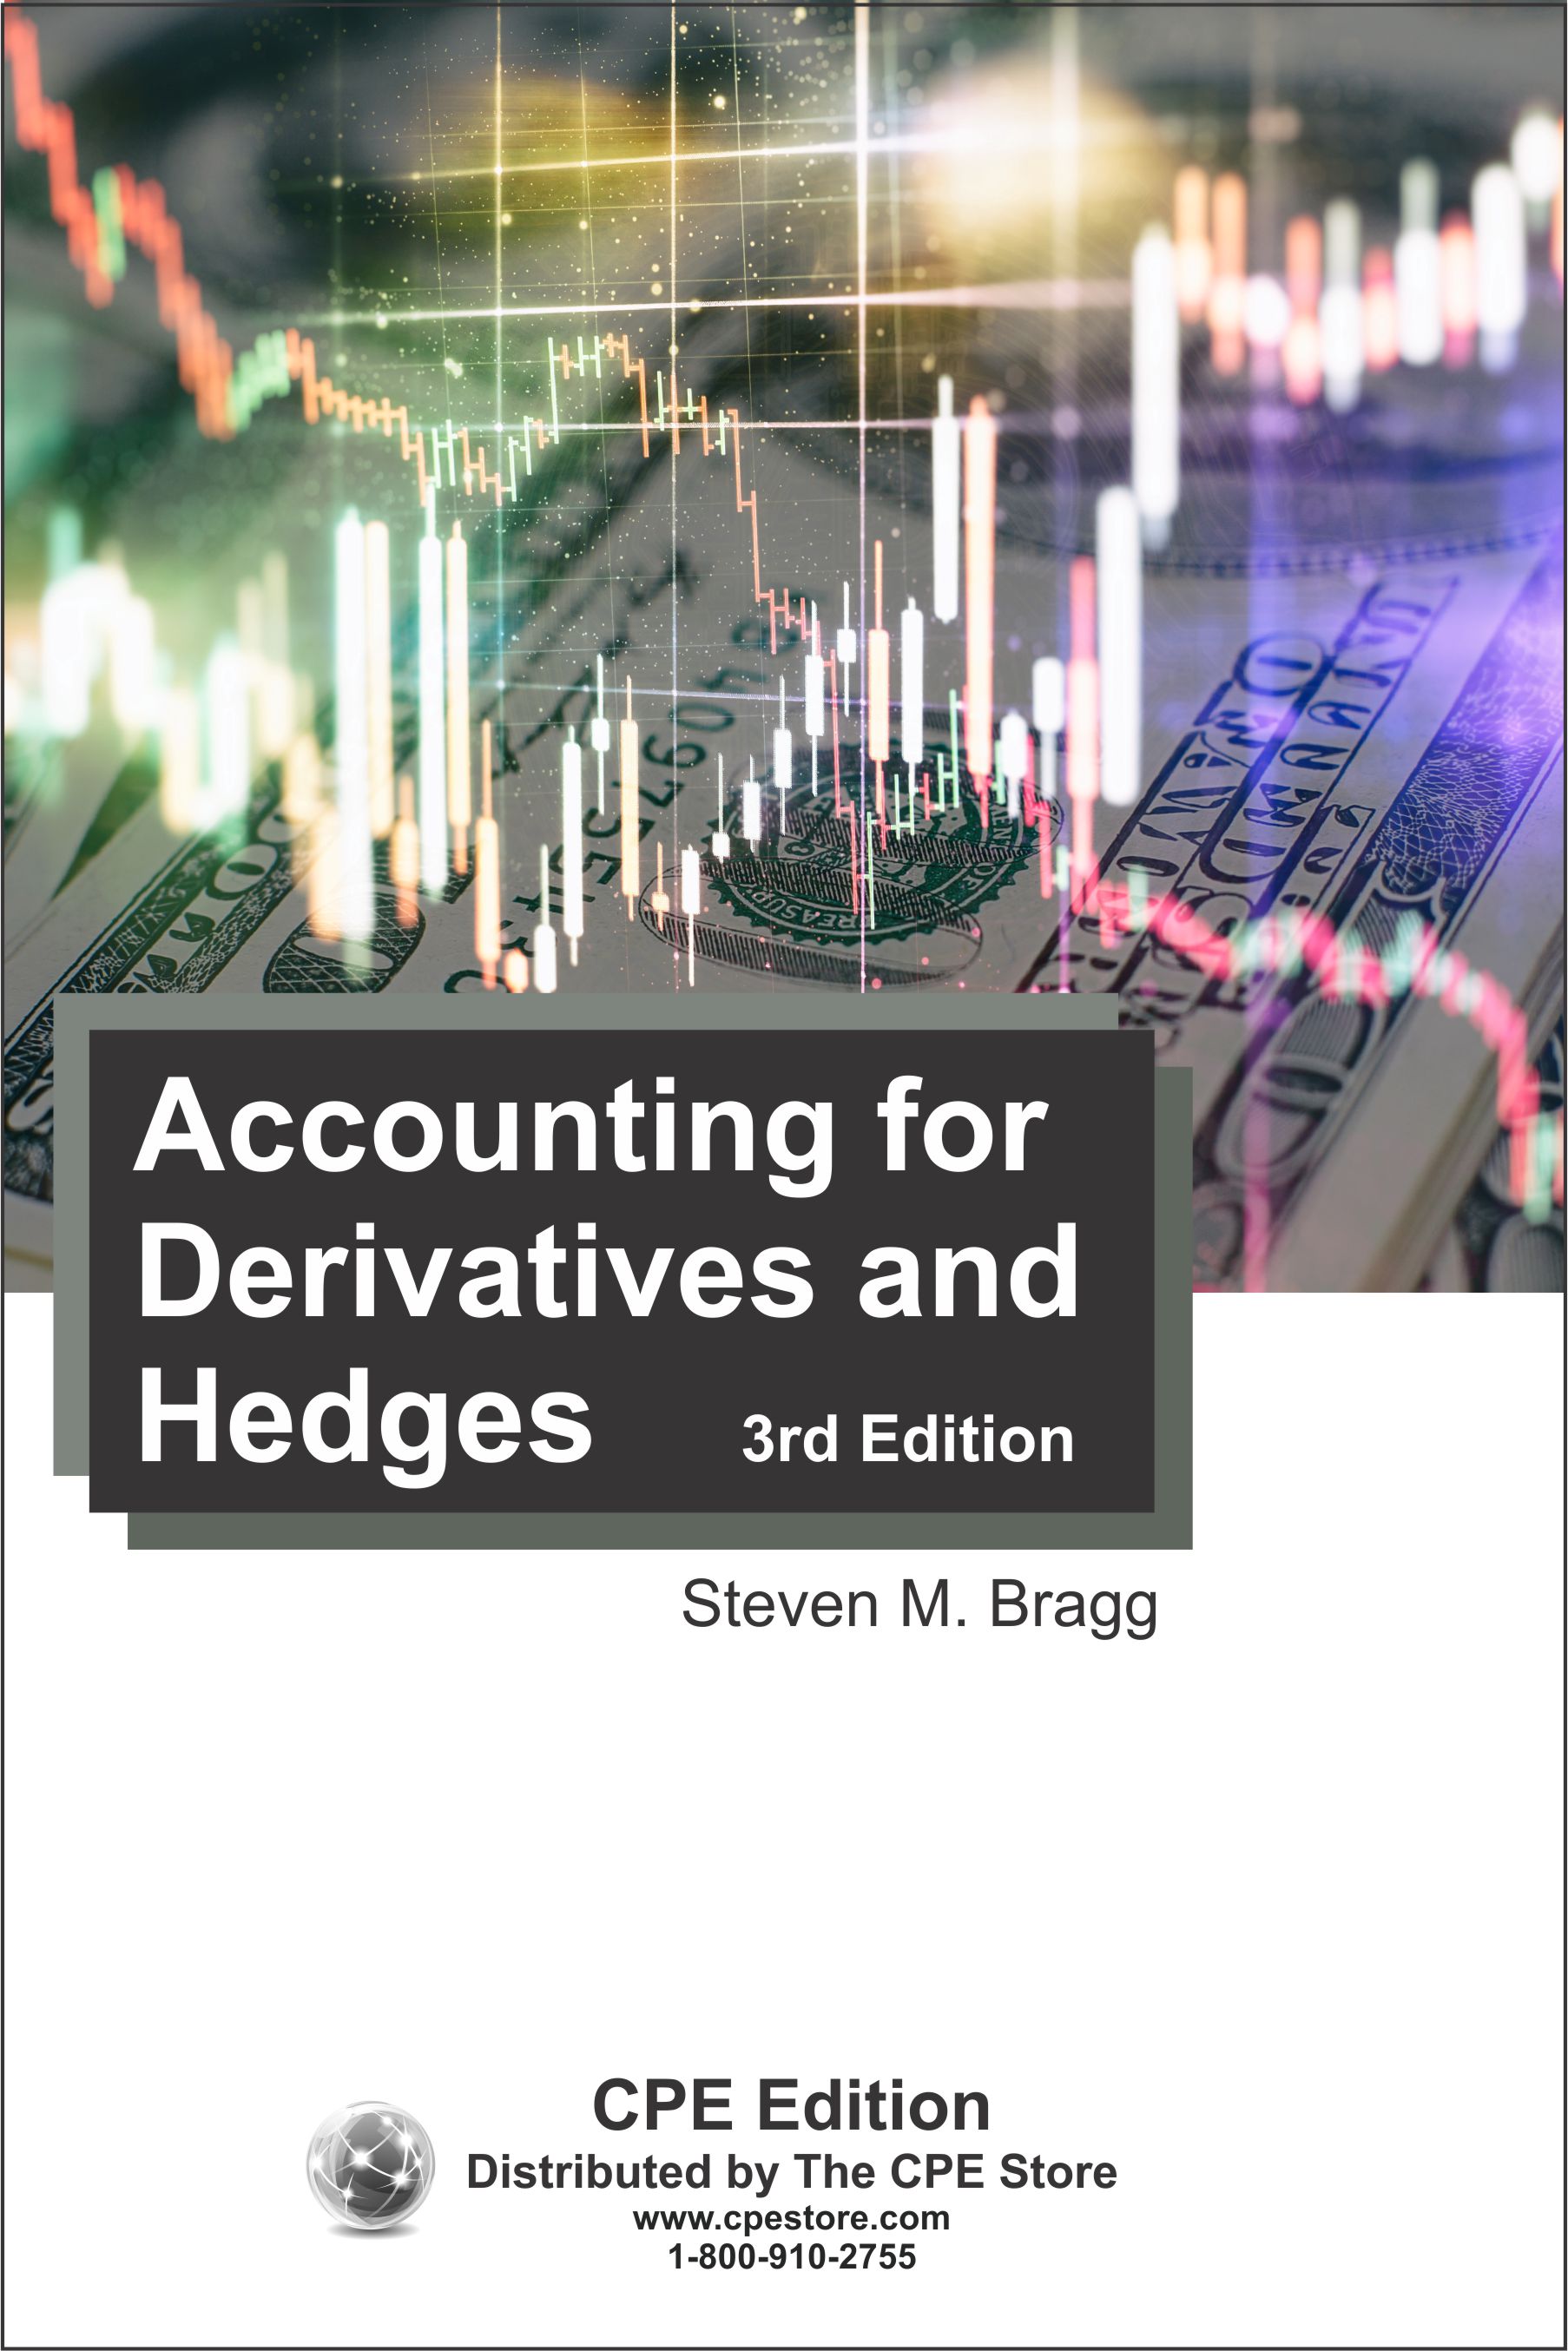 Accounting for Derivatives and Hedges